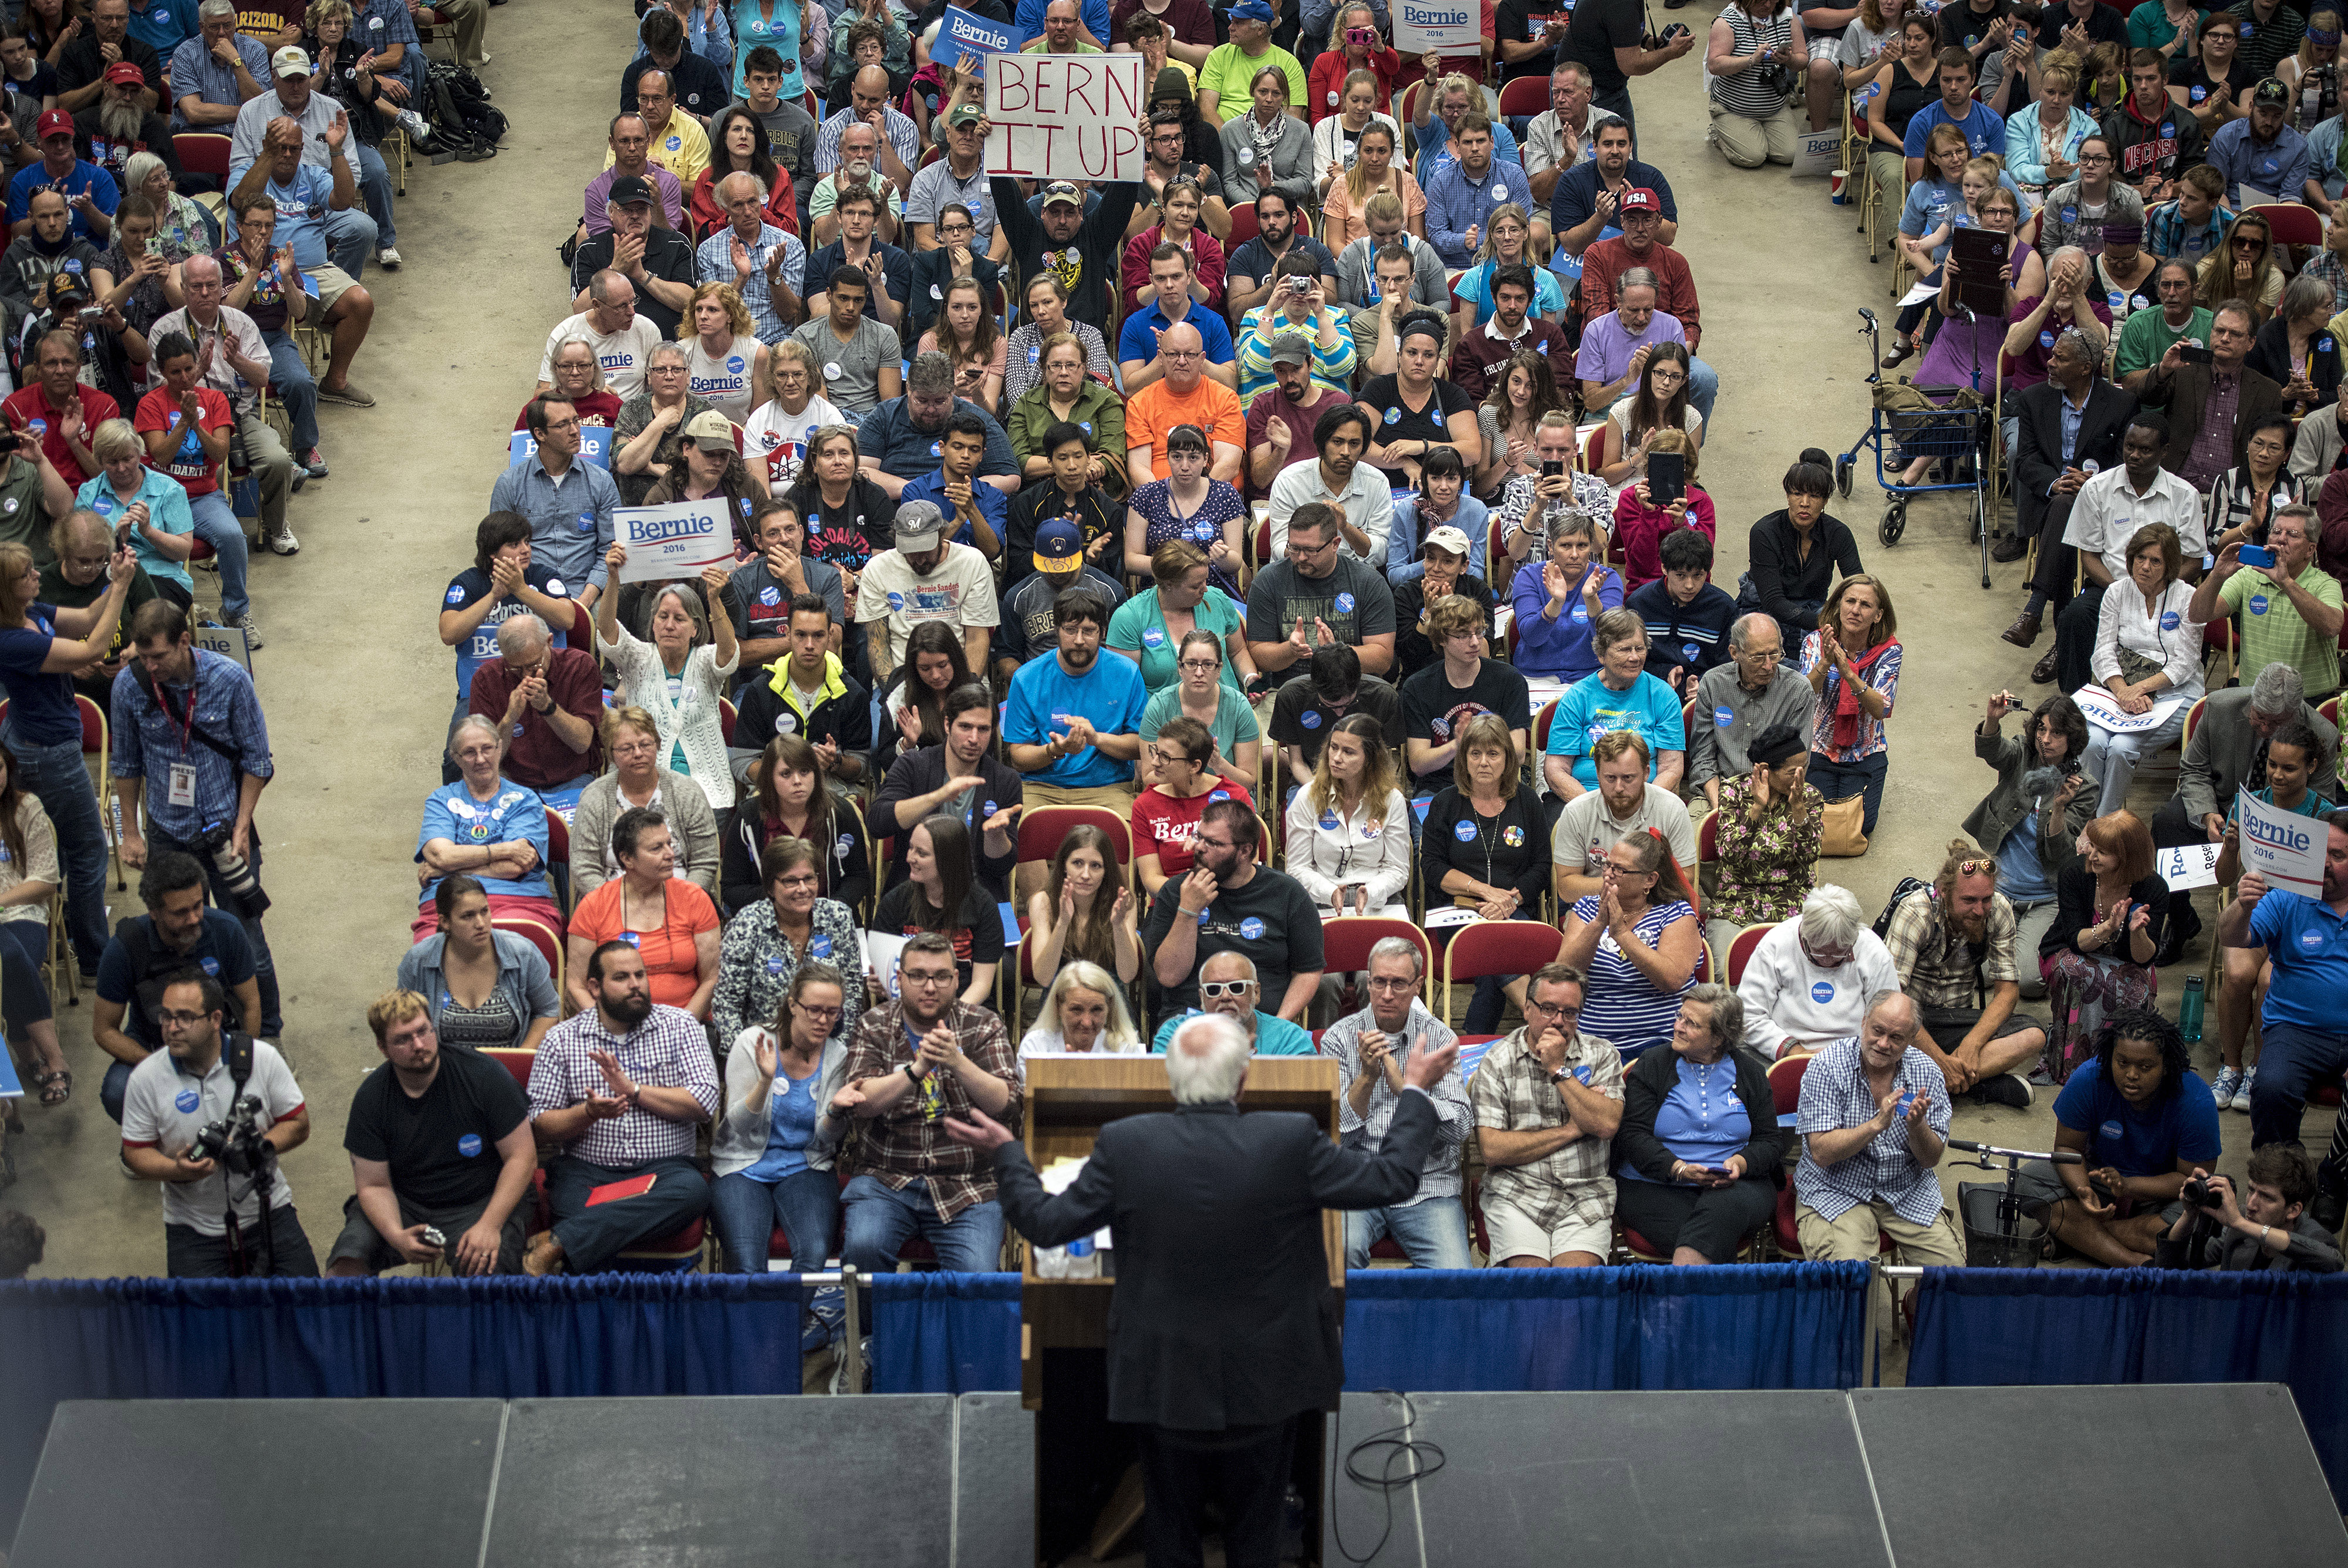 U.S. Senator Bernie Sanders, an Independent from Vermont and 2016 U.S. presidential candidate, speaks during a campaign rally in Madison, Wisconsin, U.S., on Wednesday, July 1, 2015. (Christopher Dilts—Bloomberg/Getty Images)